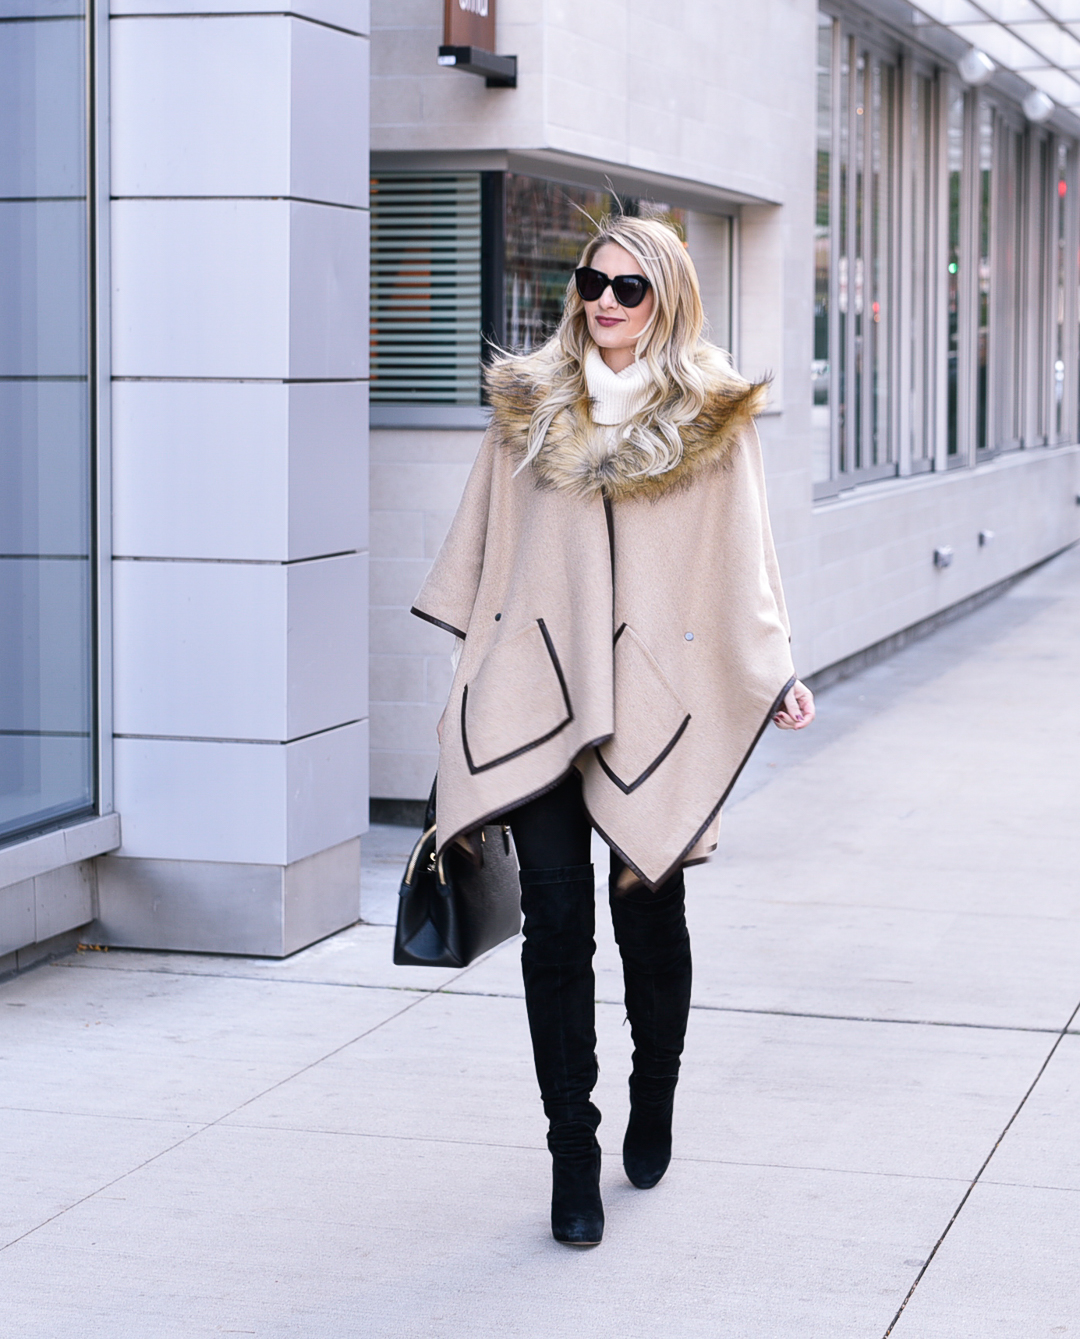 Jenna Colgrove wearing the Evy's Tree Vanessa cape in brown with a fur collar! 